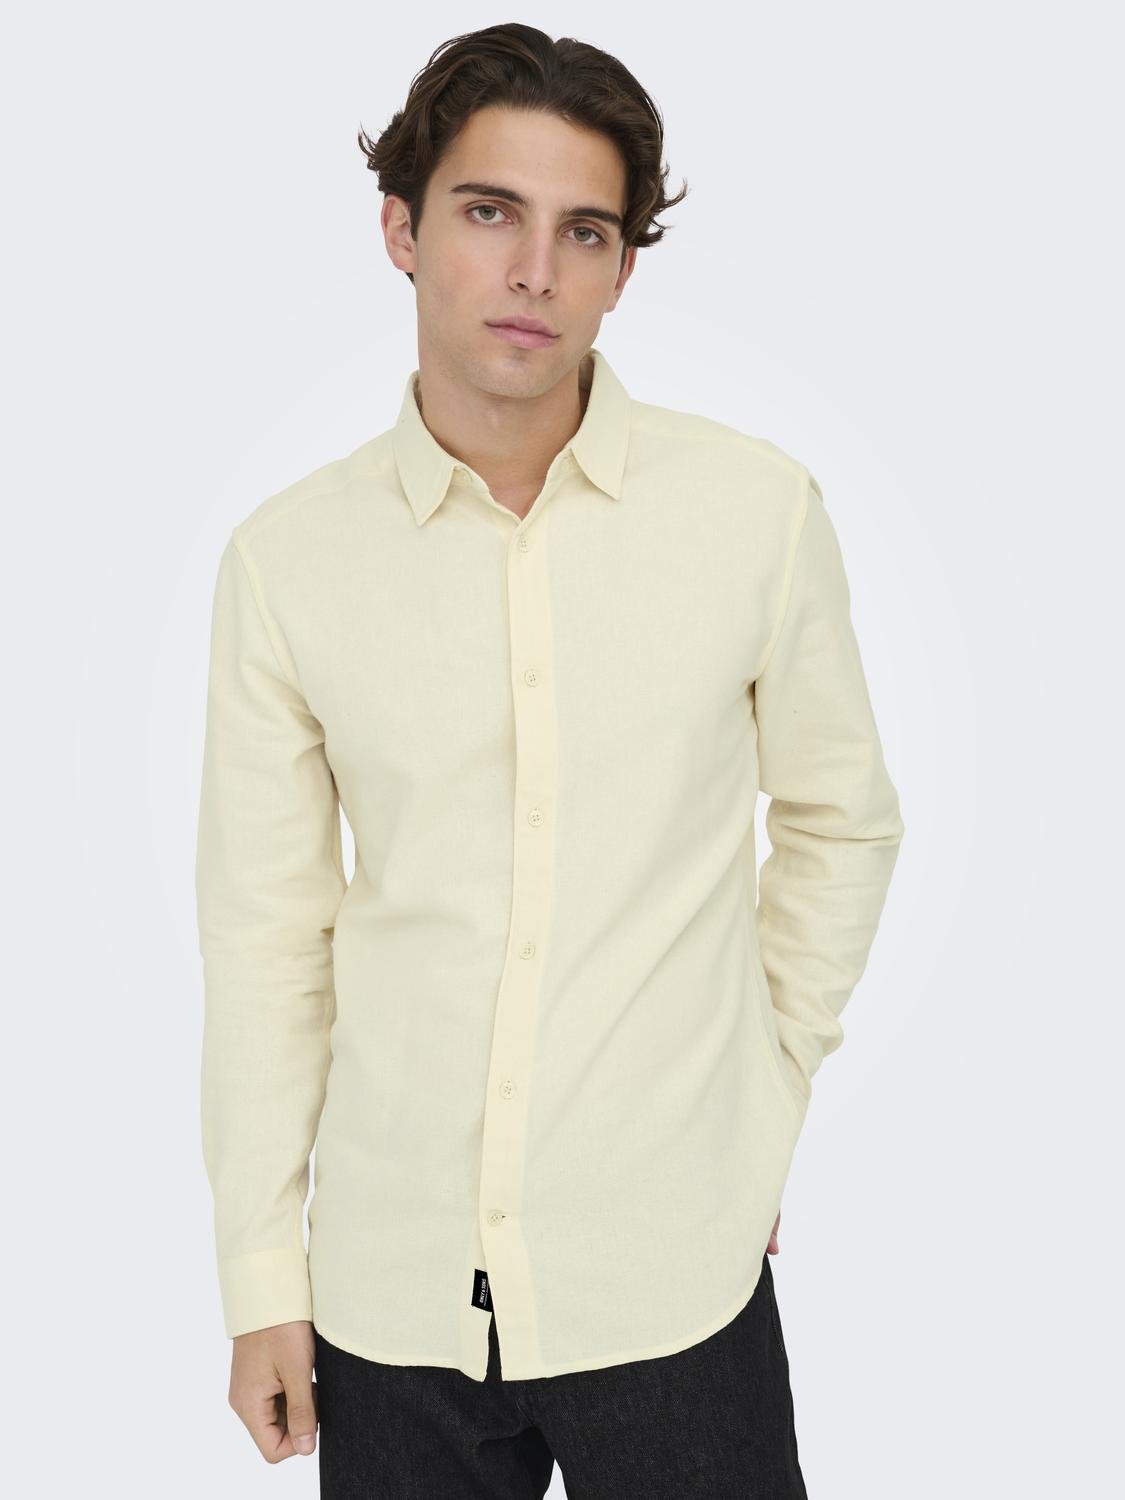 ONLY & SONS Regular fit shirt -Antique White - 22027786